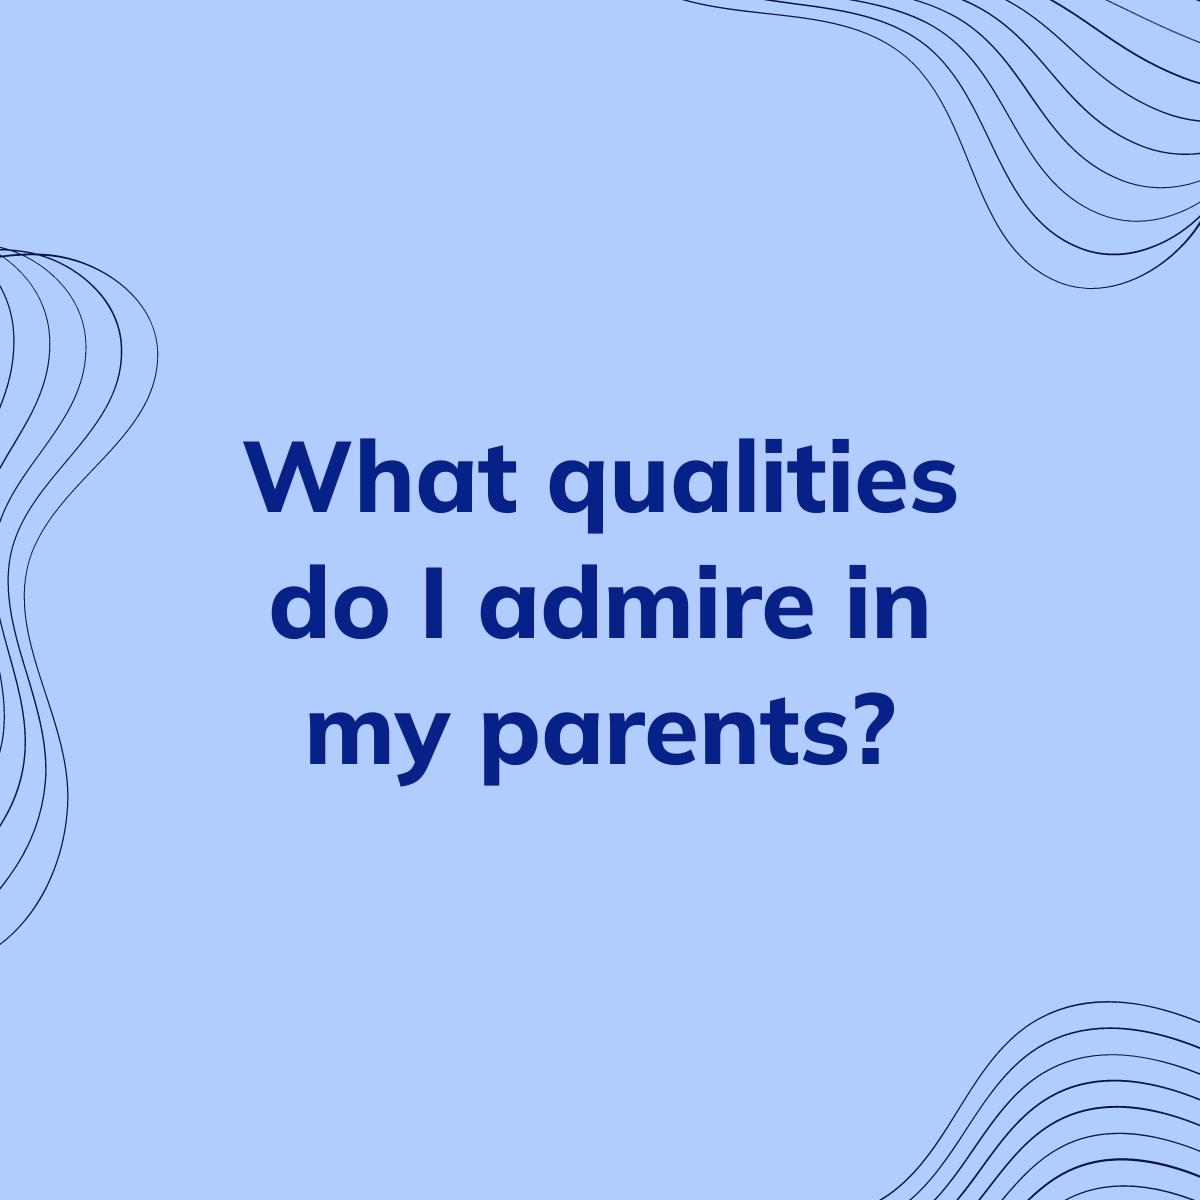 Journal Prompt: What qualities do I admire in my parents?